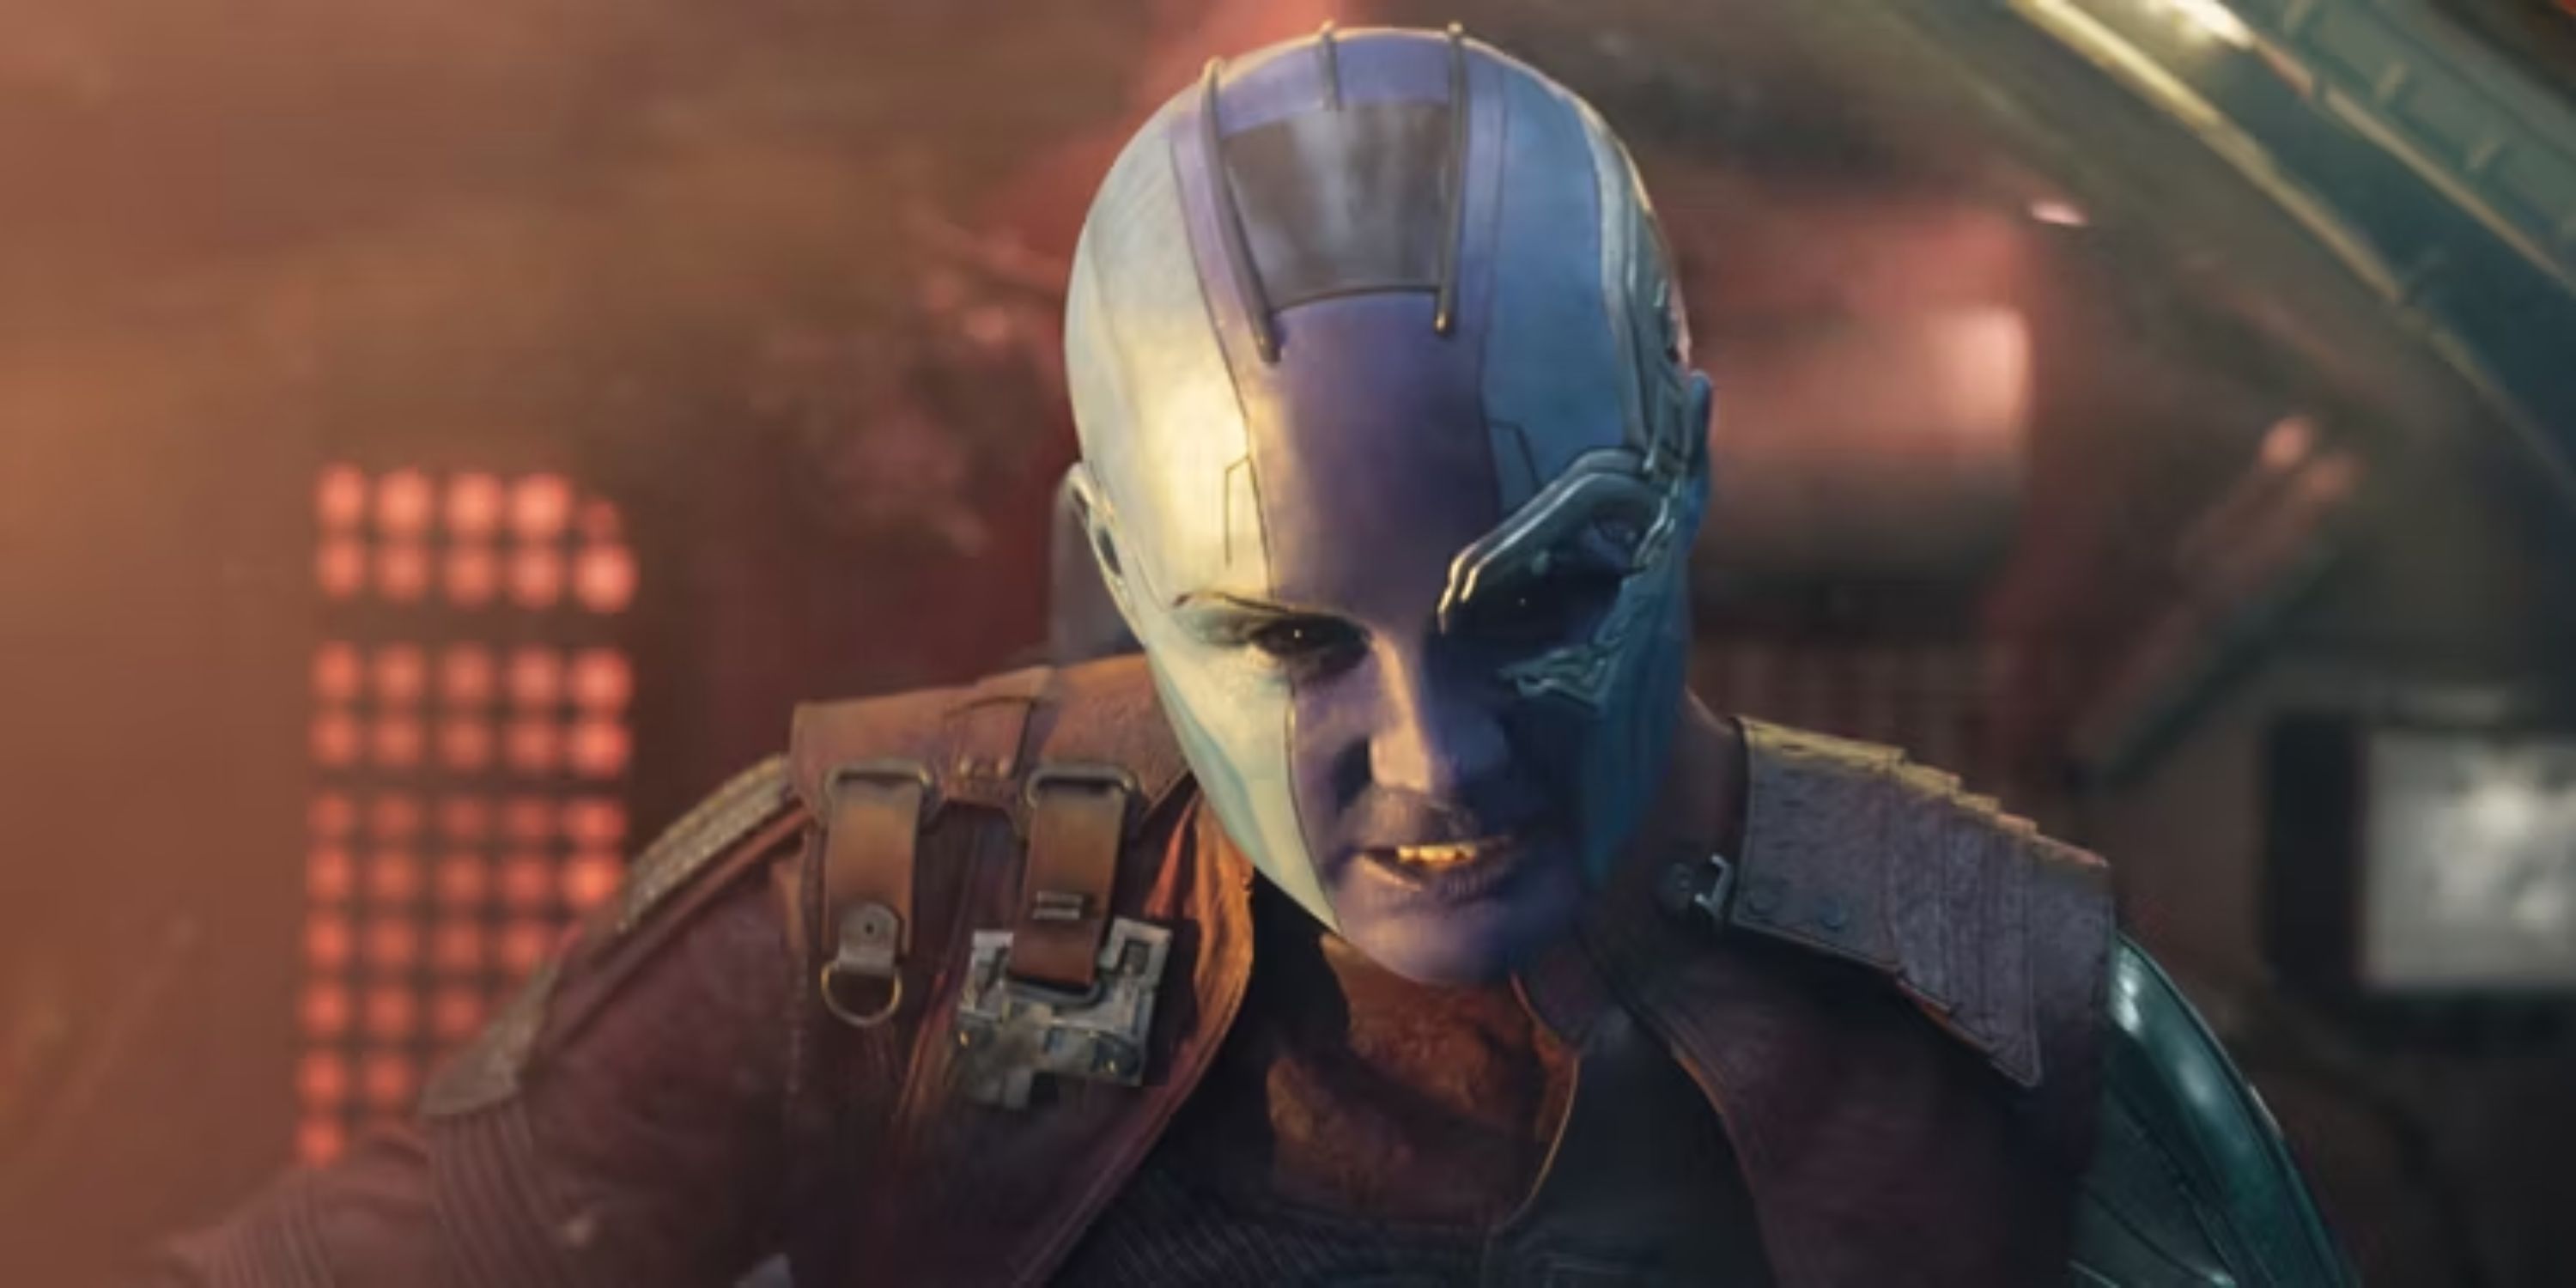 Nebula clenching her teeth in anger in Guardians of the Galaxy Vol 2.